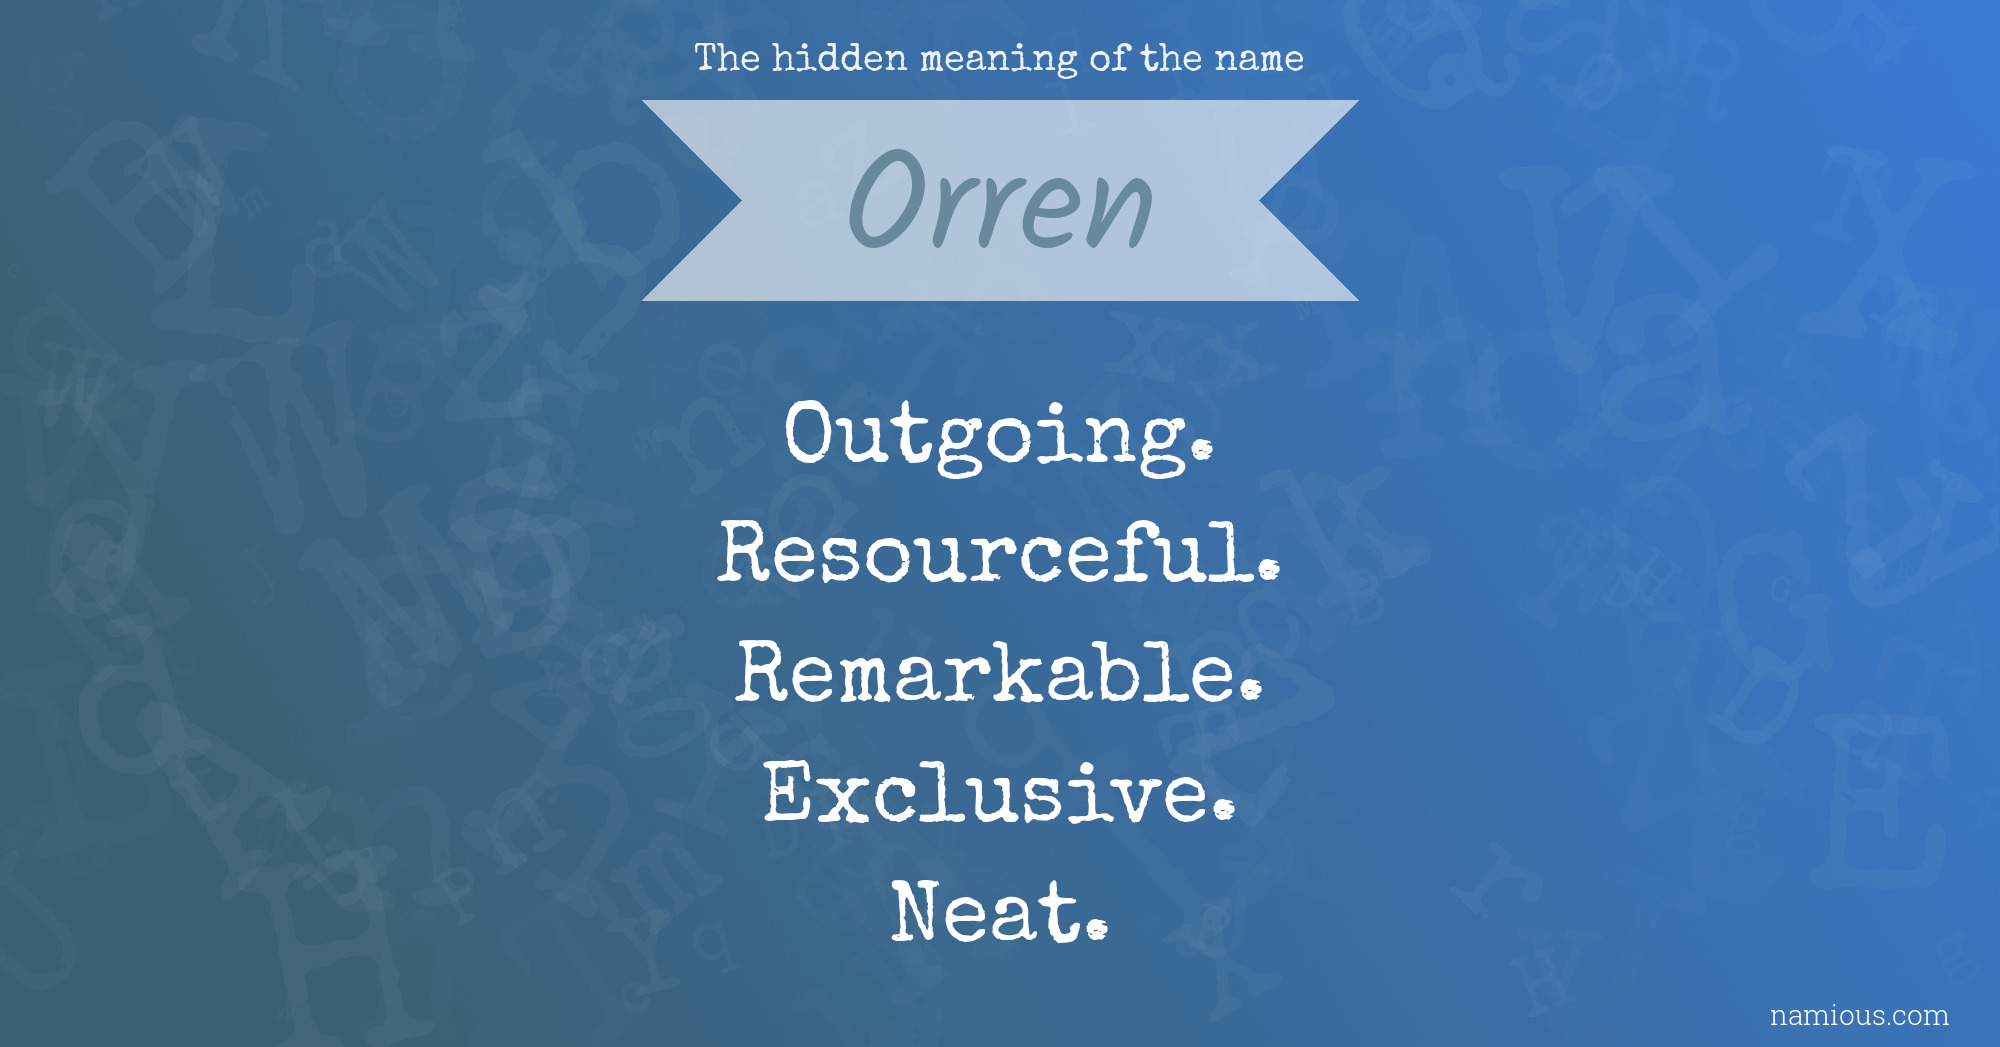 The hidden meaning of the name Orren